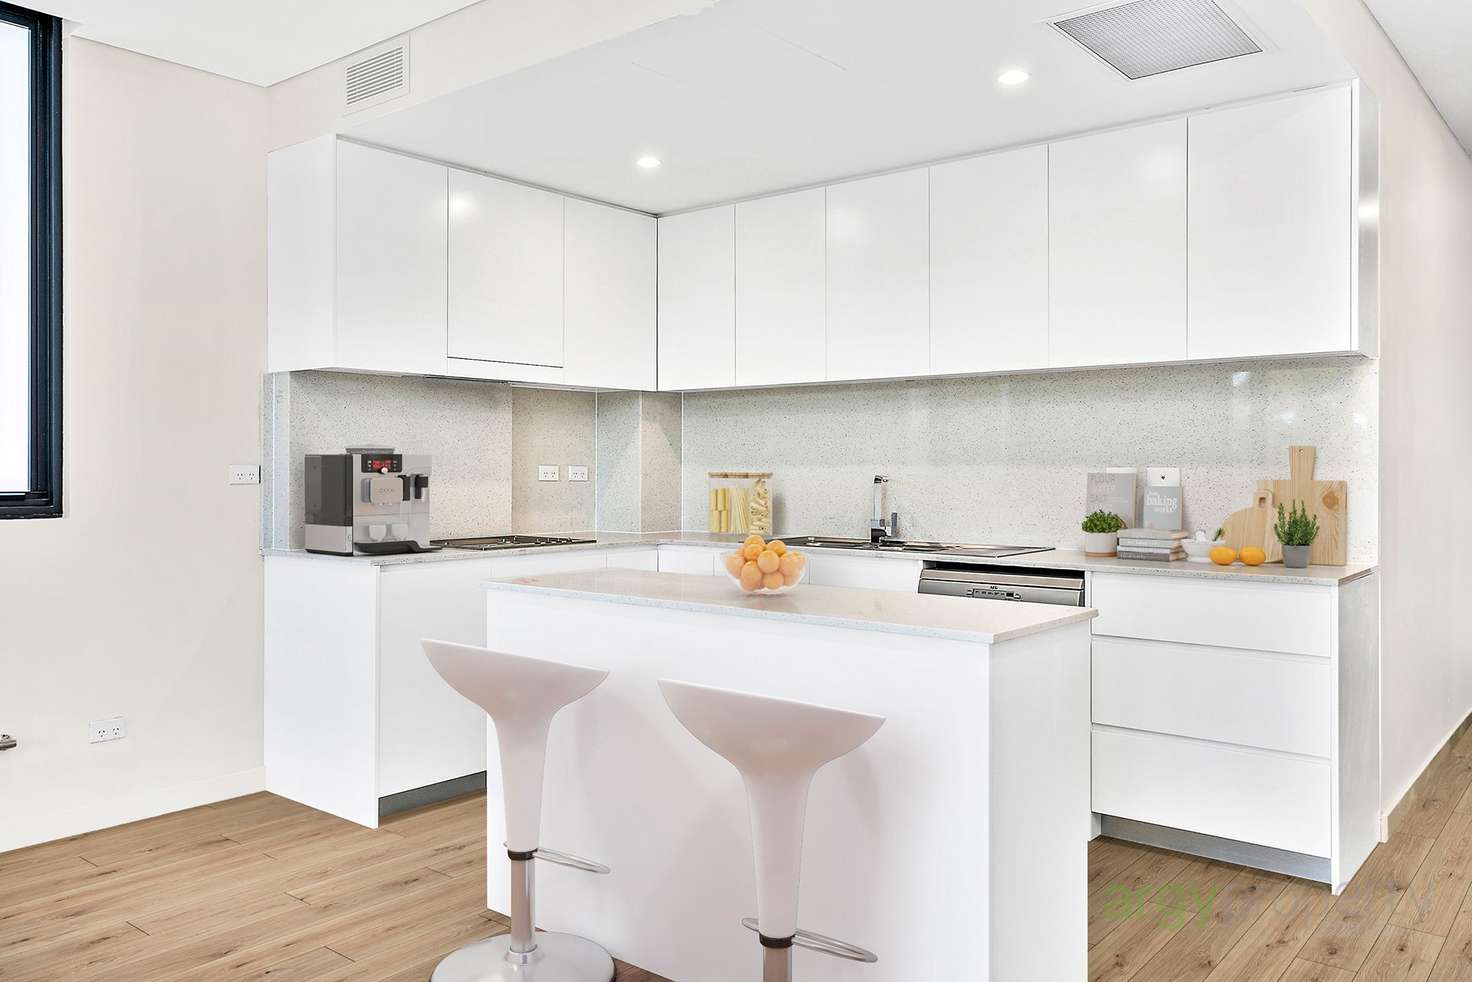 Main view of Homely apartment listing, 2.01/23 Plant Street, Carlton NSW 2218